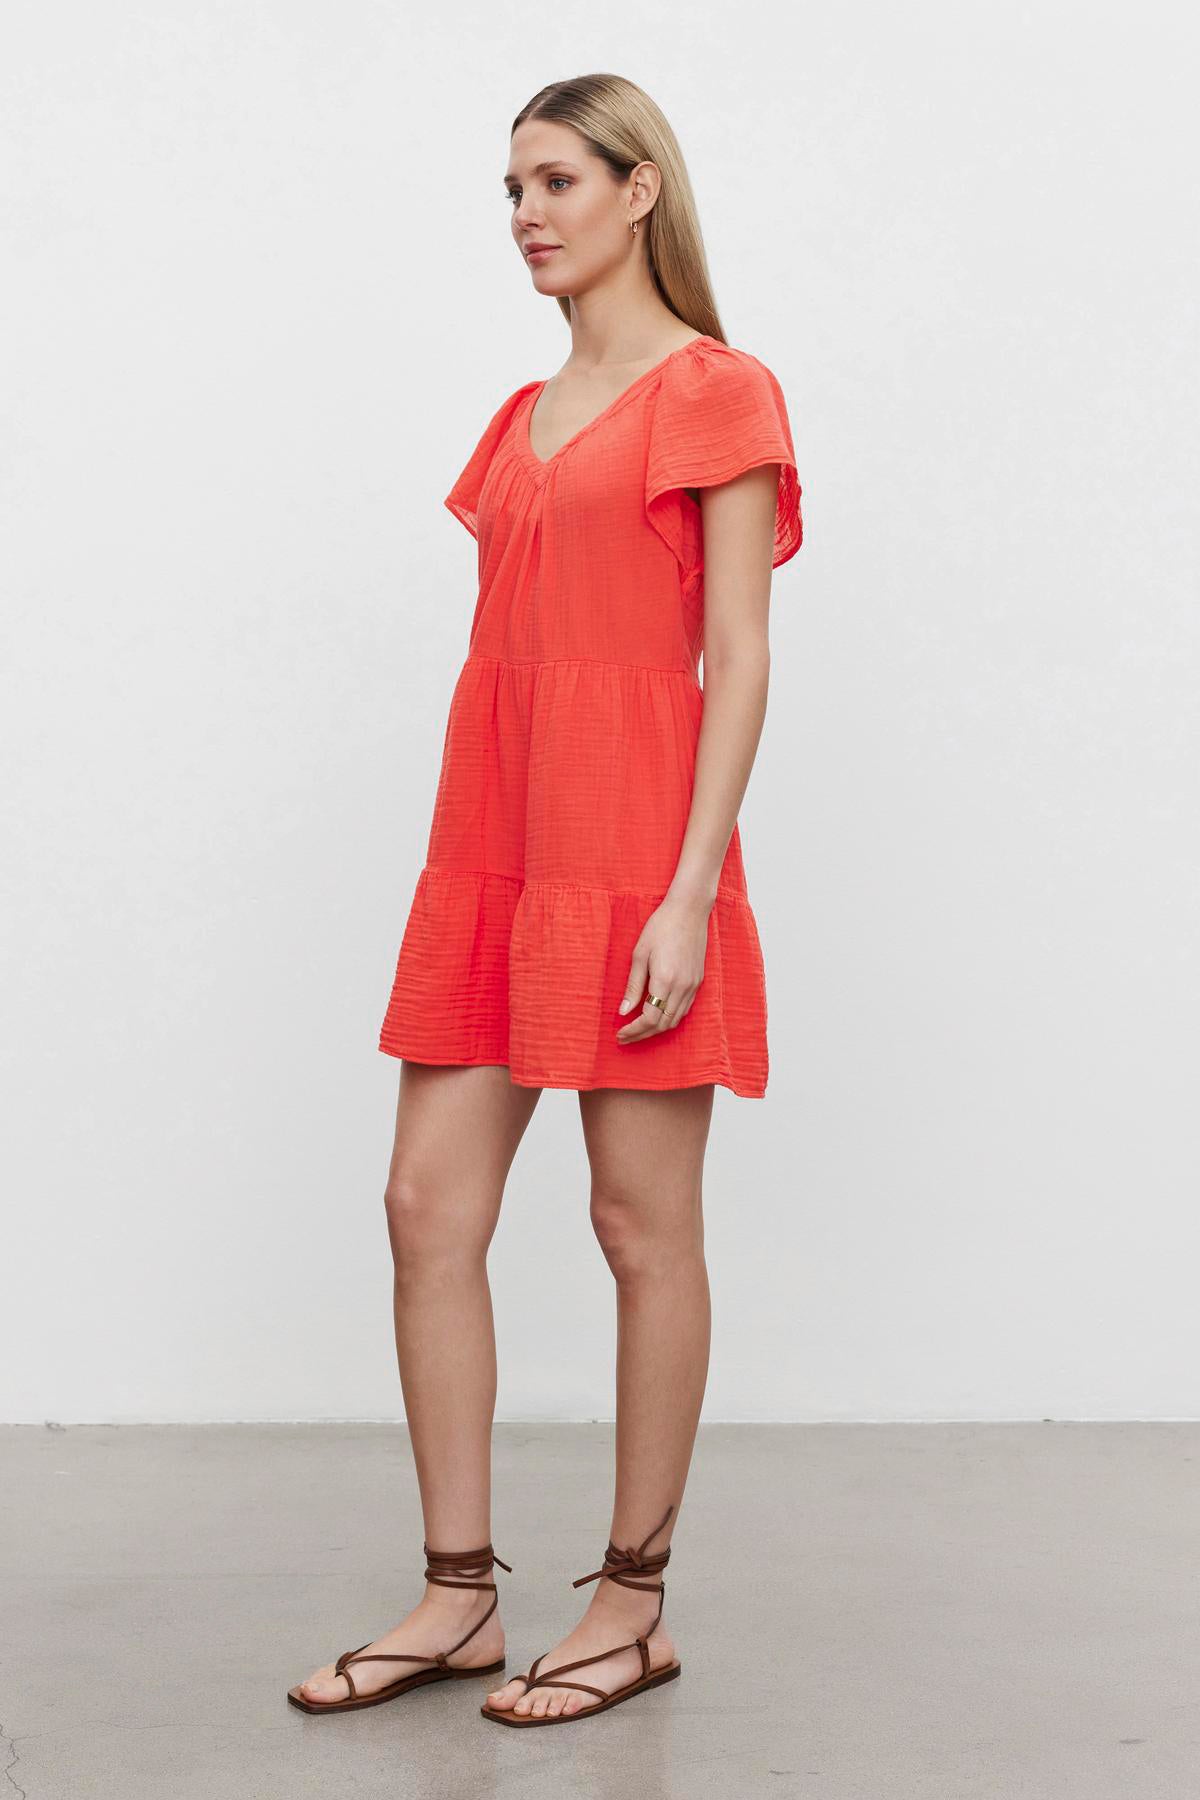 A woman stands against a plain background wearing a bright orange, Velvet by Graham & Spencer Eleanor Cotton Gauze Tiered Dress with tiered silhouette and brown strappy sandals.-36532828602561